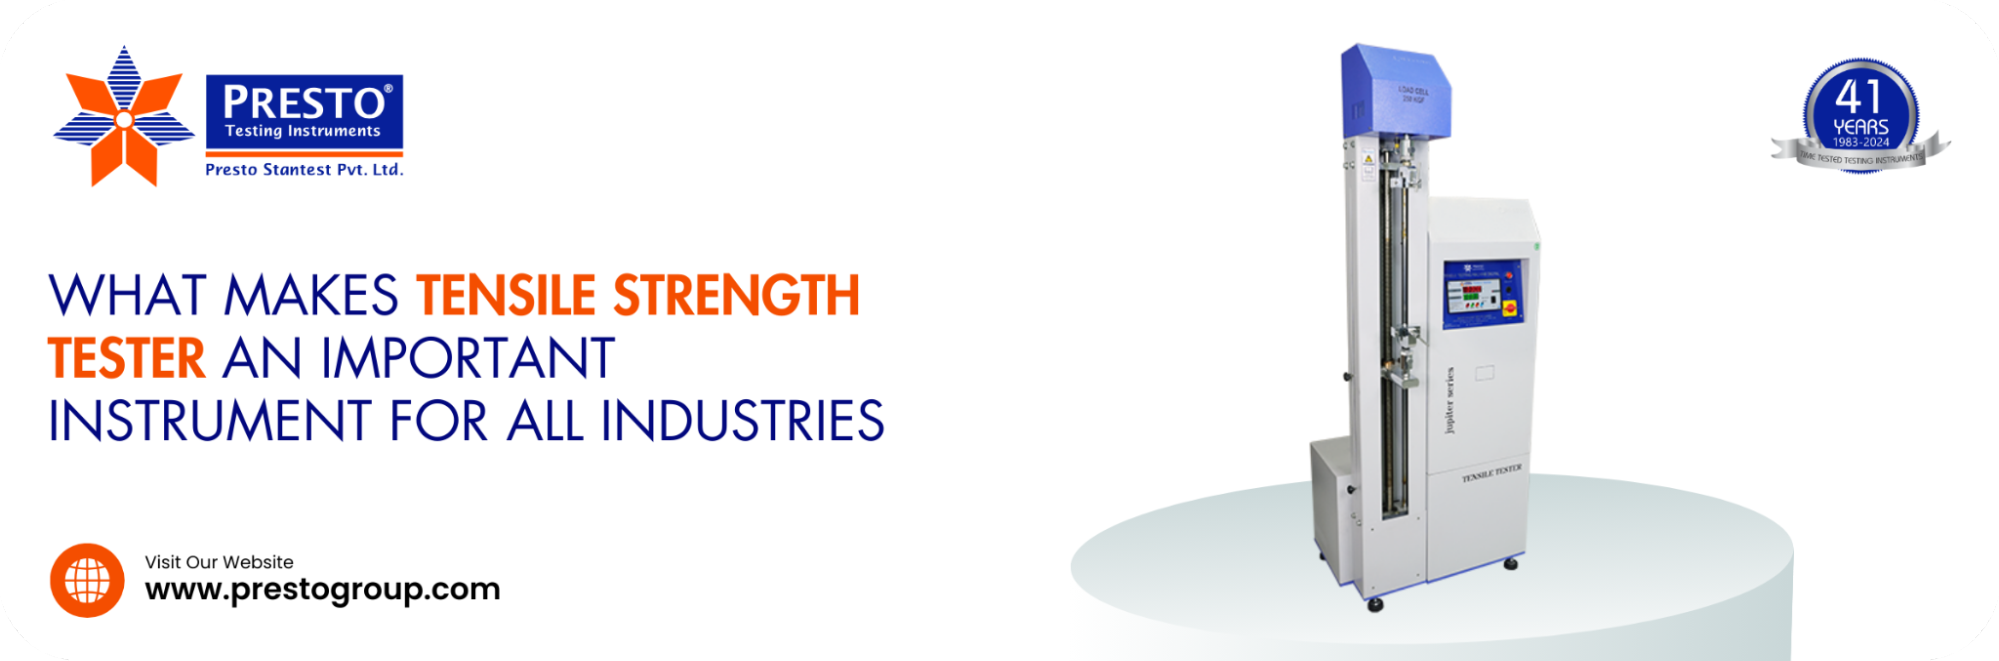 What Makes Tensile Strength Tester an Important Instrument for All Industries?